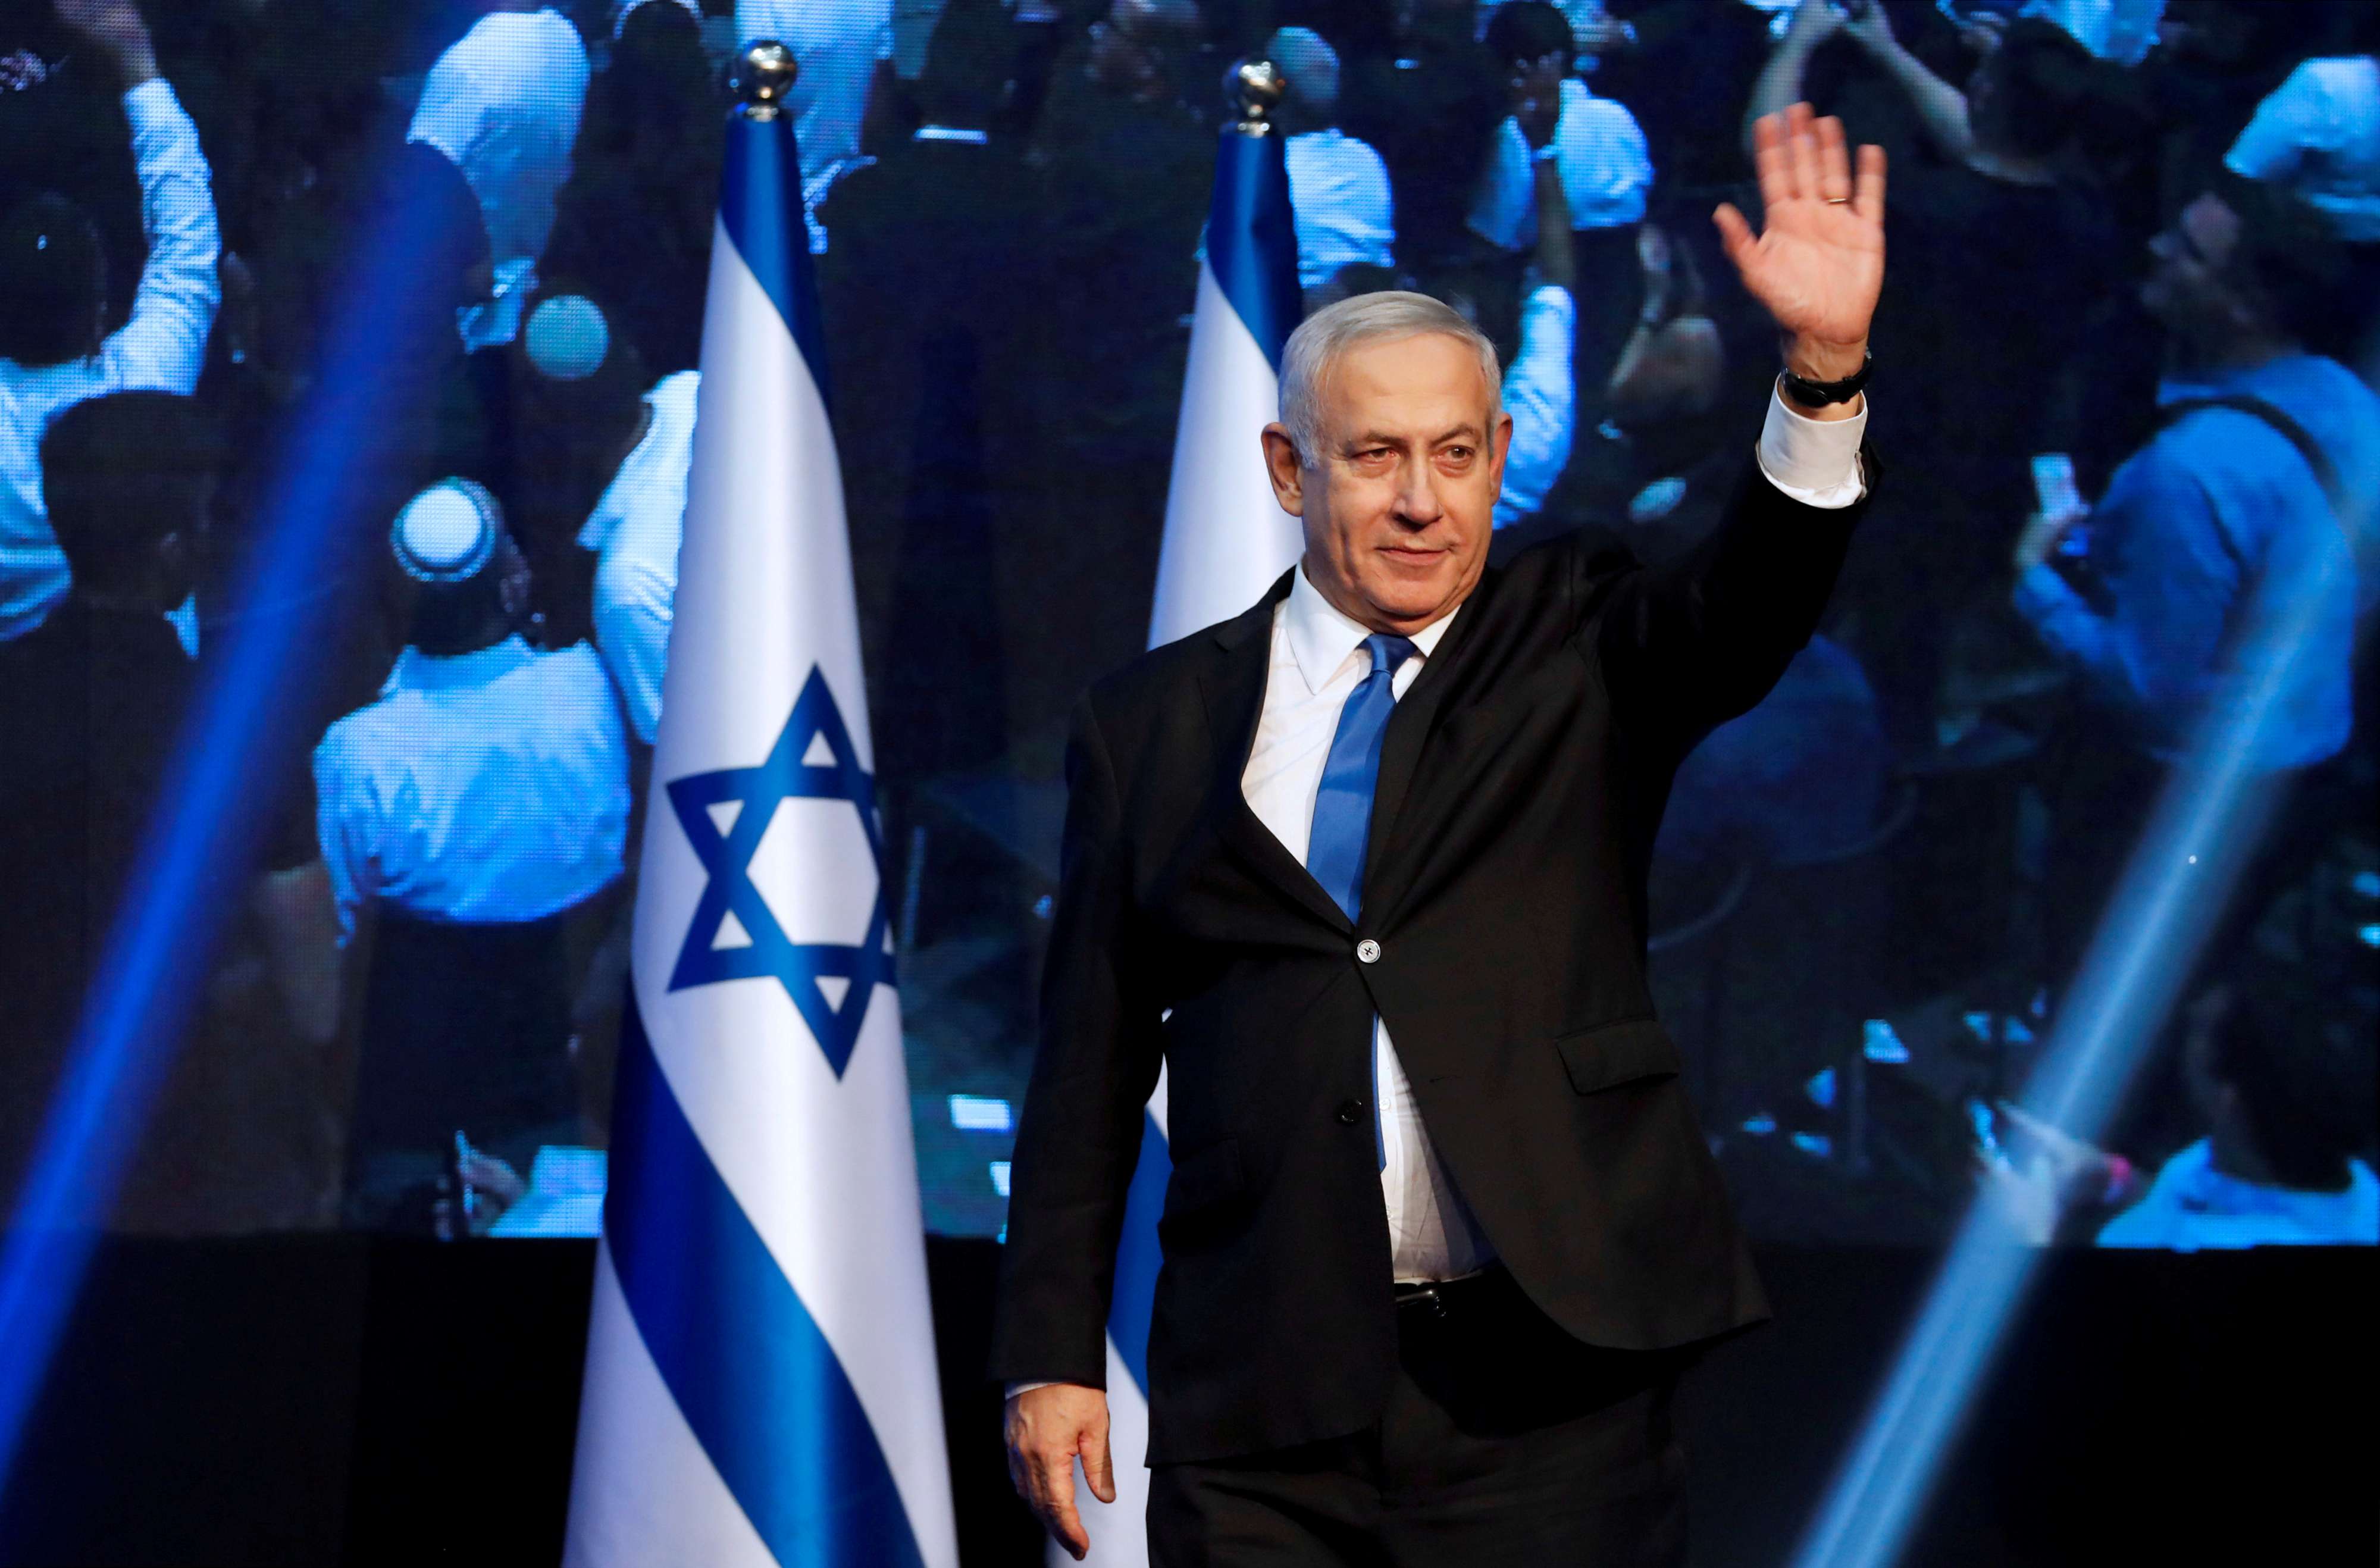 Netanyahu has received the endorsement of 55 parliament members to be prime minister, while Gantz has received 54.